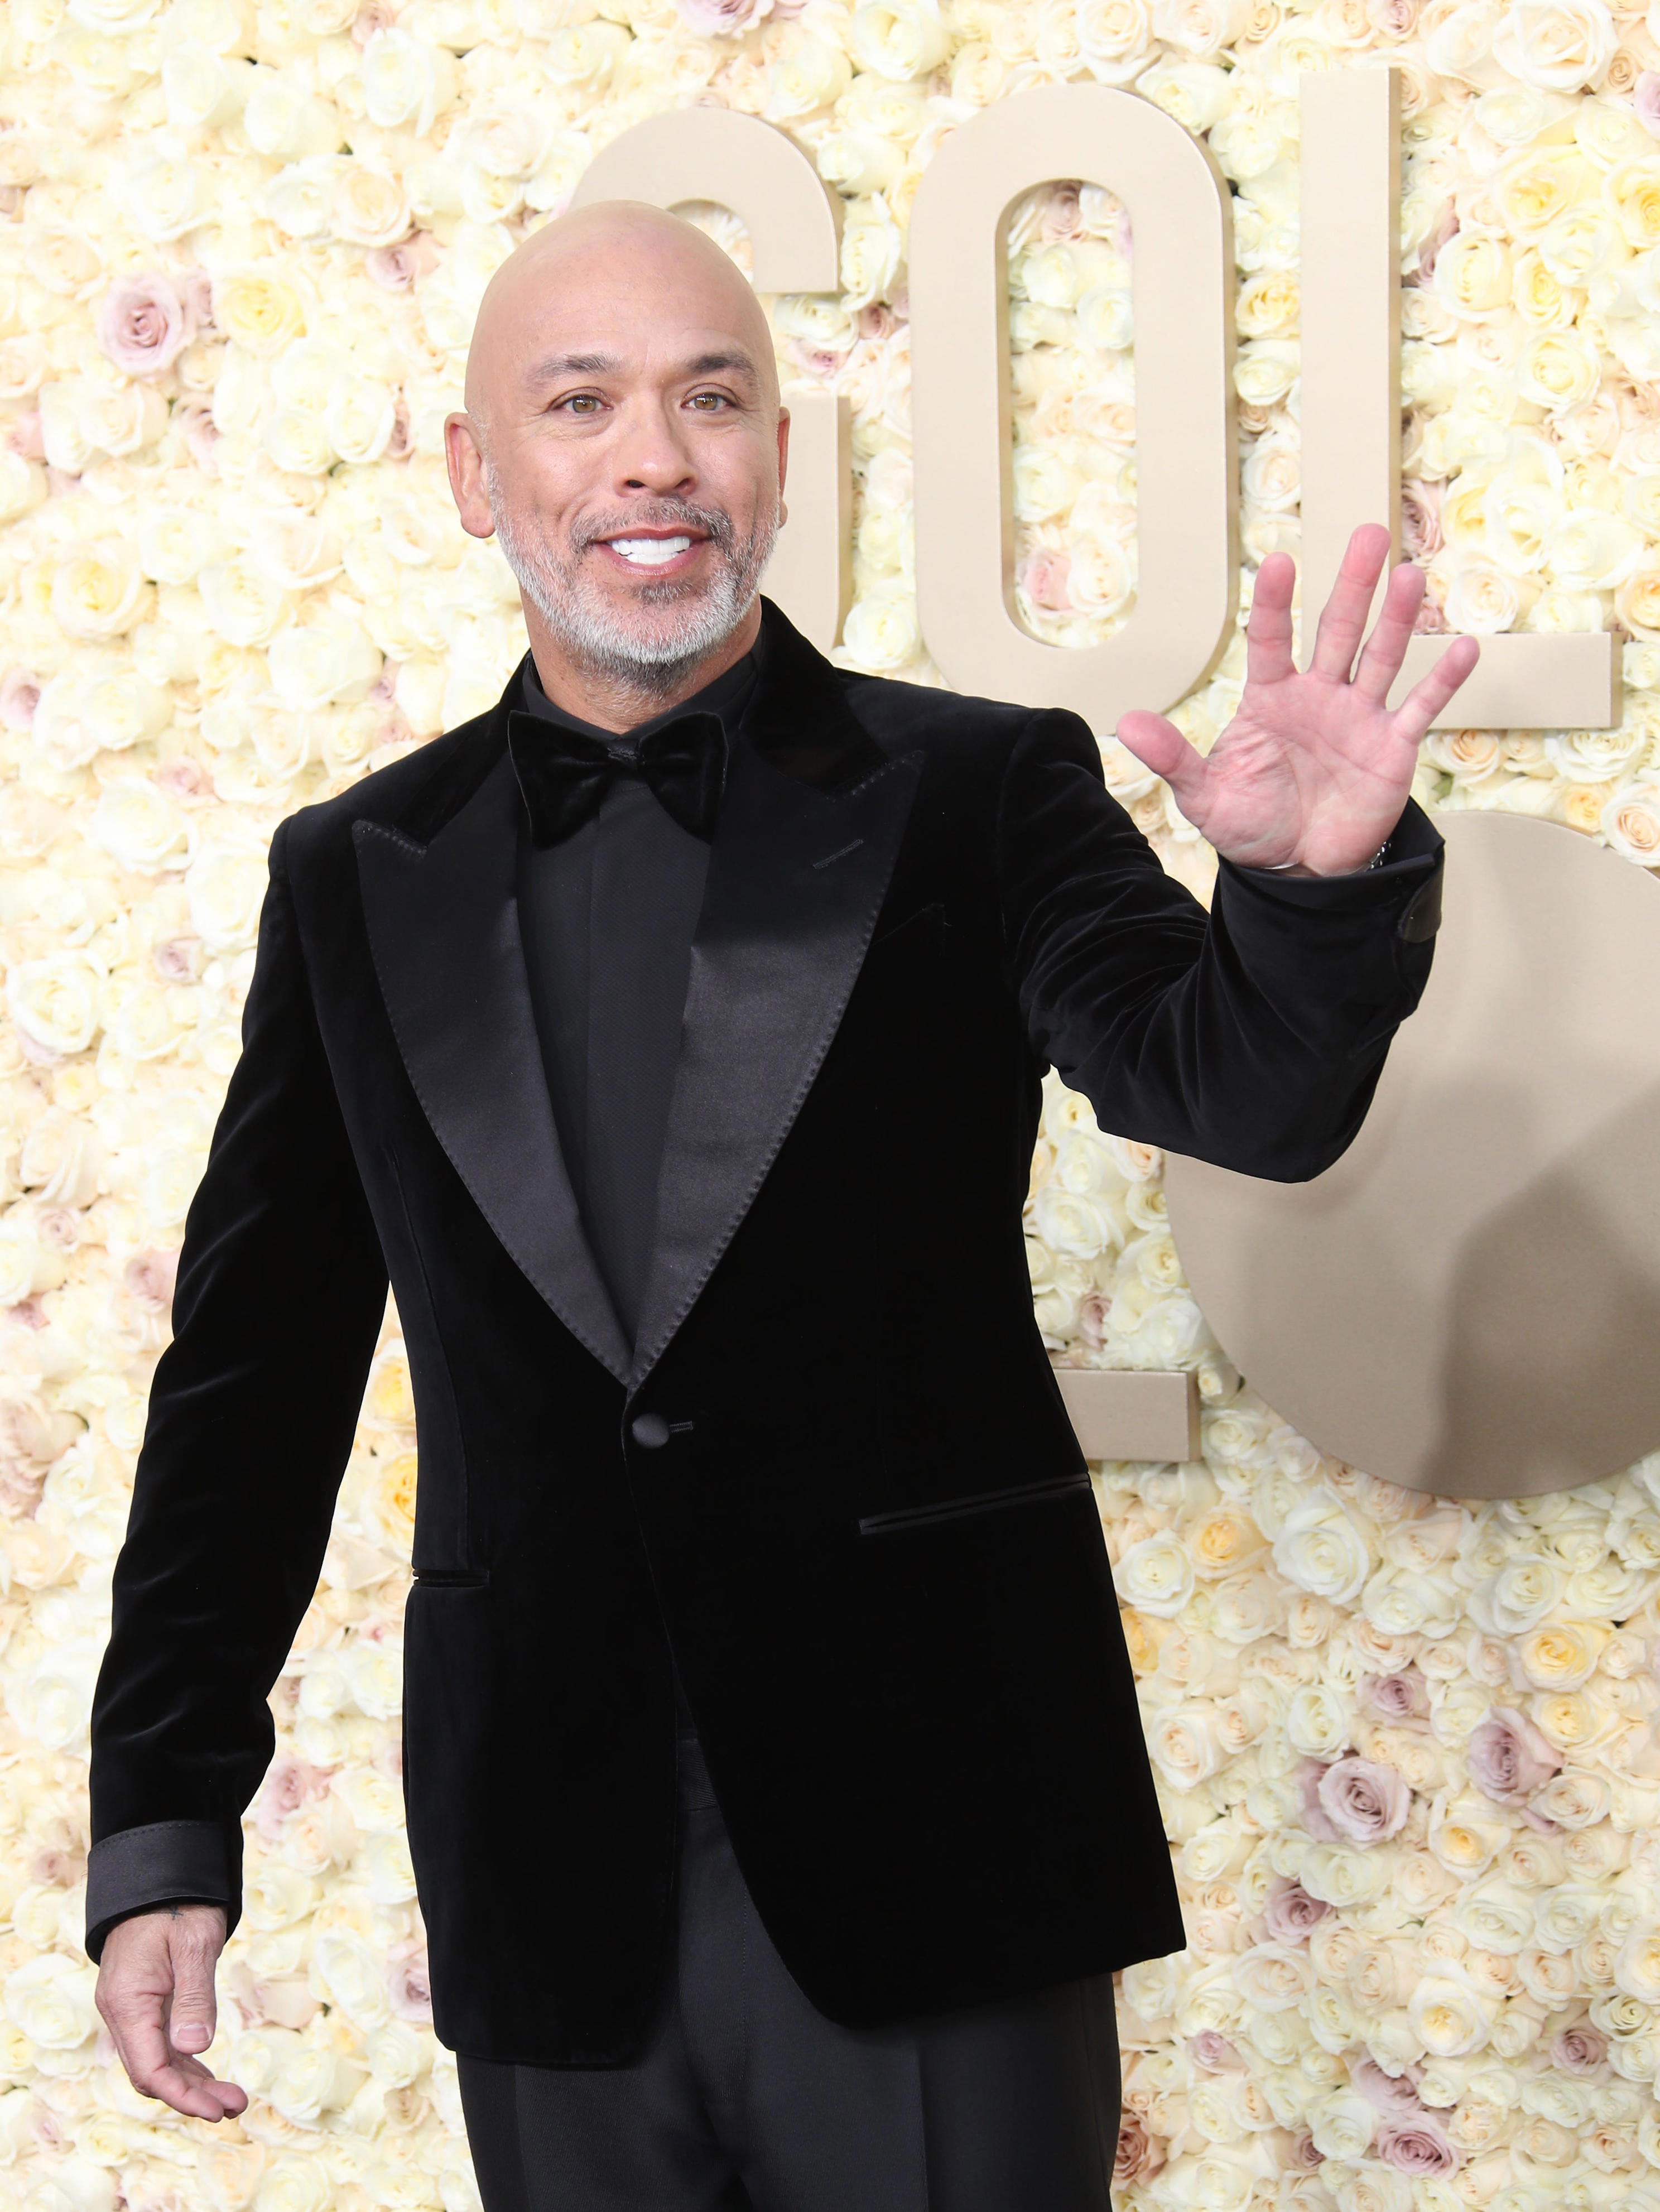 Jo Koy is 'happy' he hosted Golden Globes despite criticism: 'I did ...